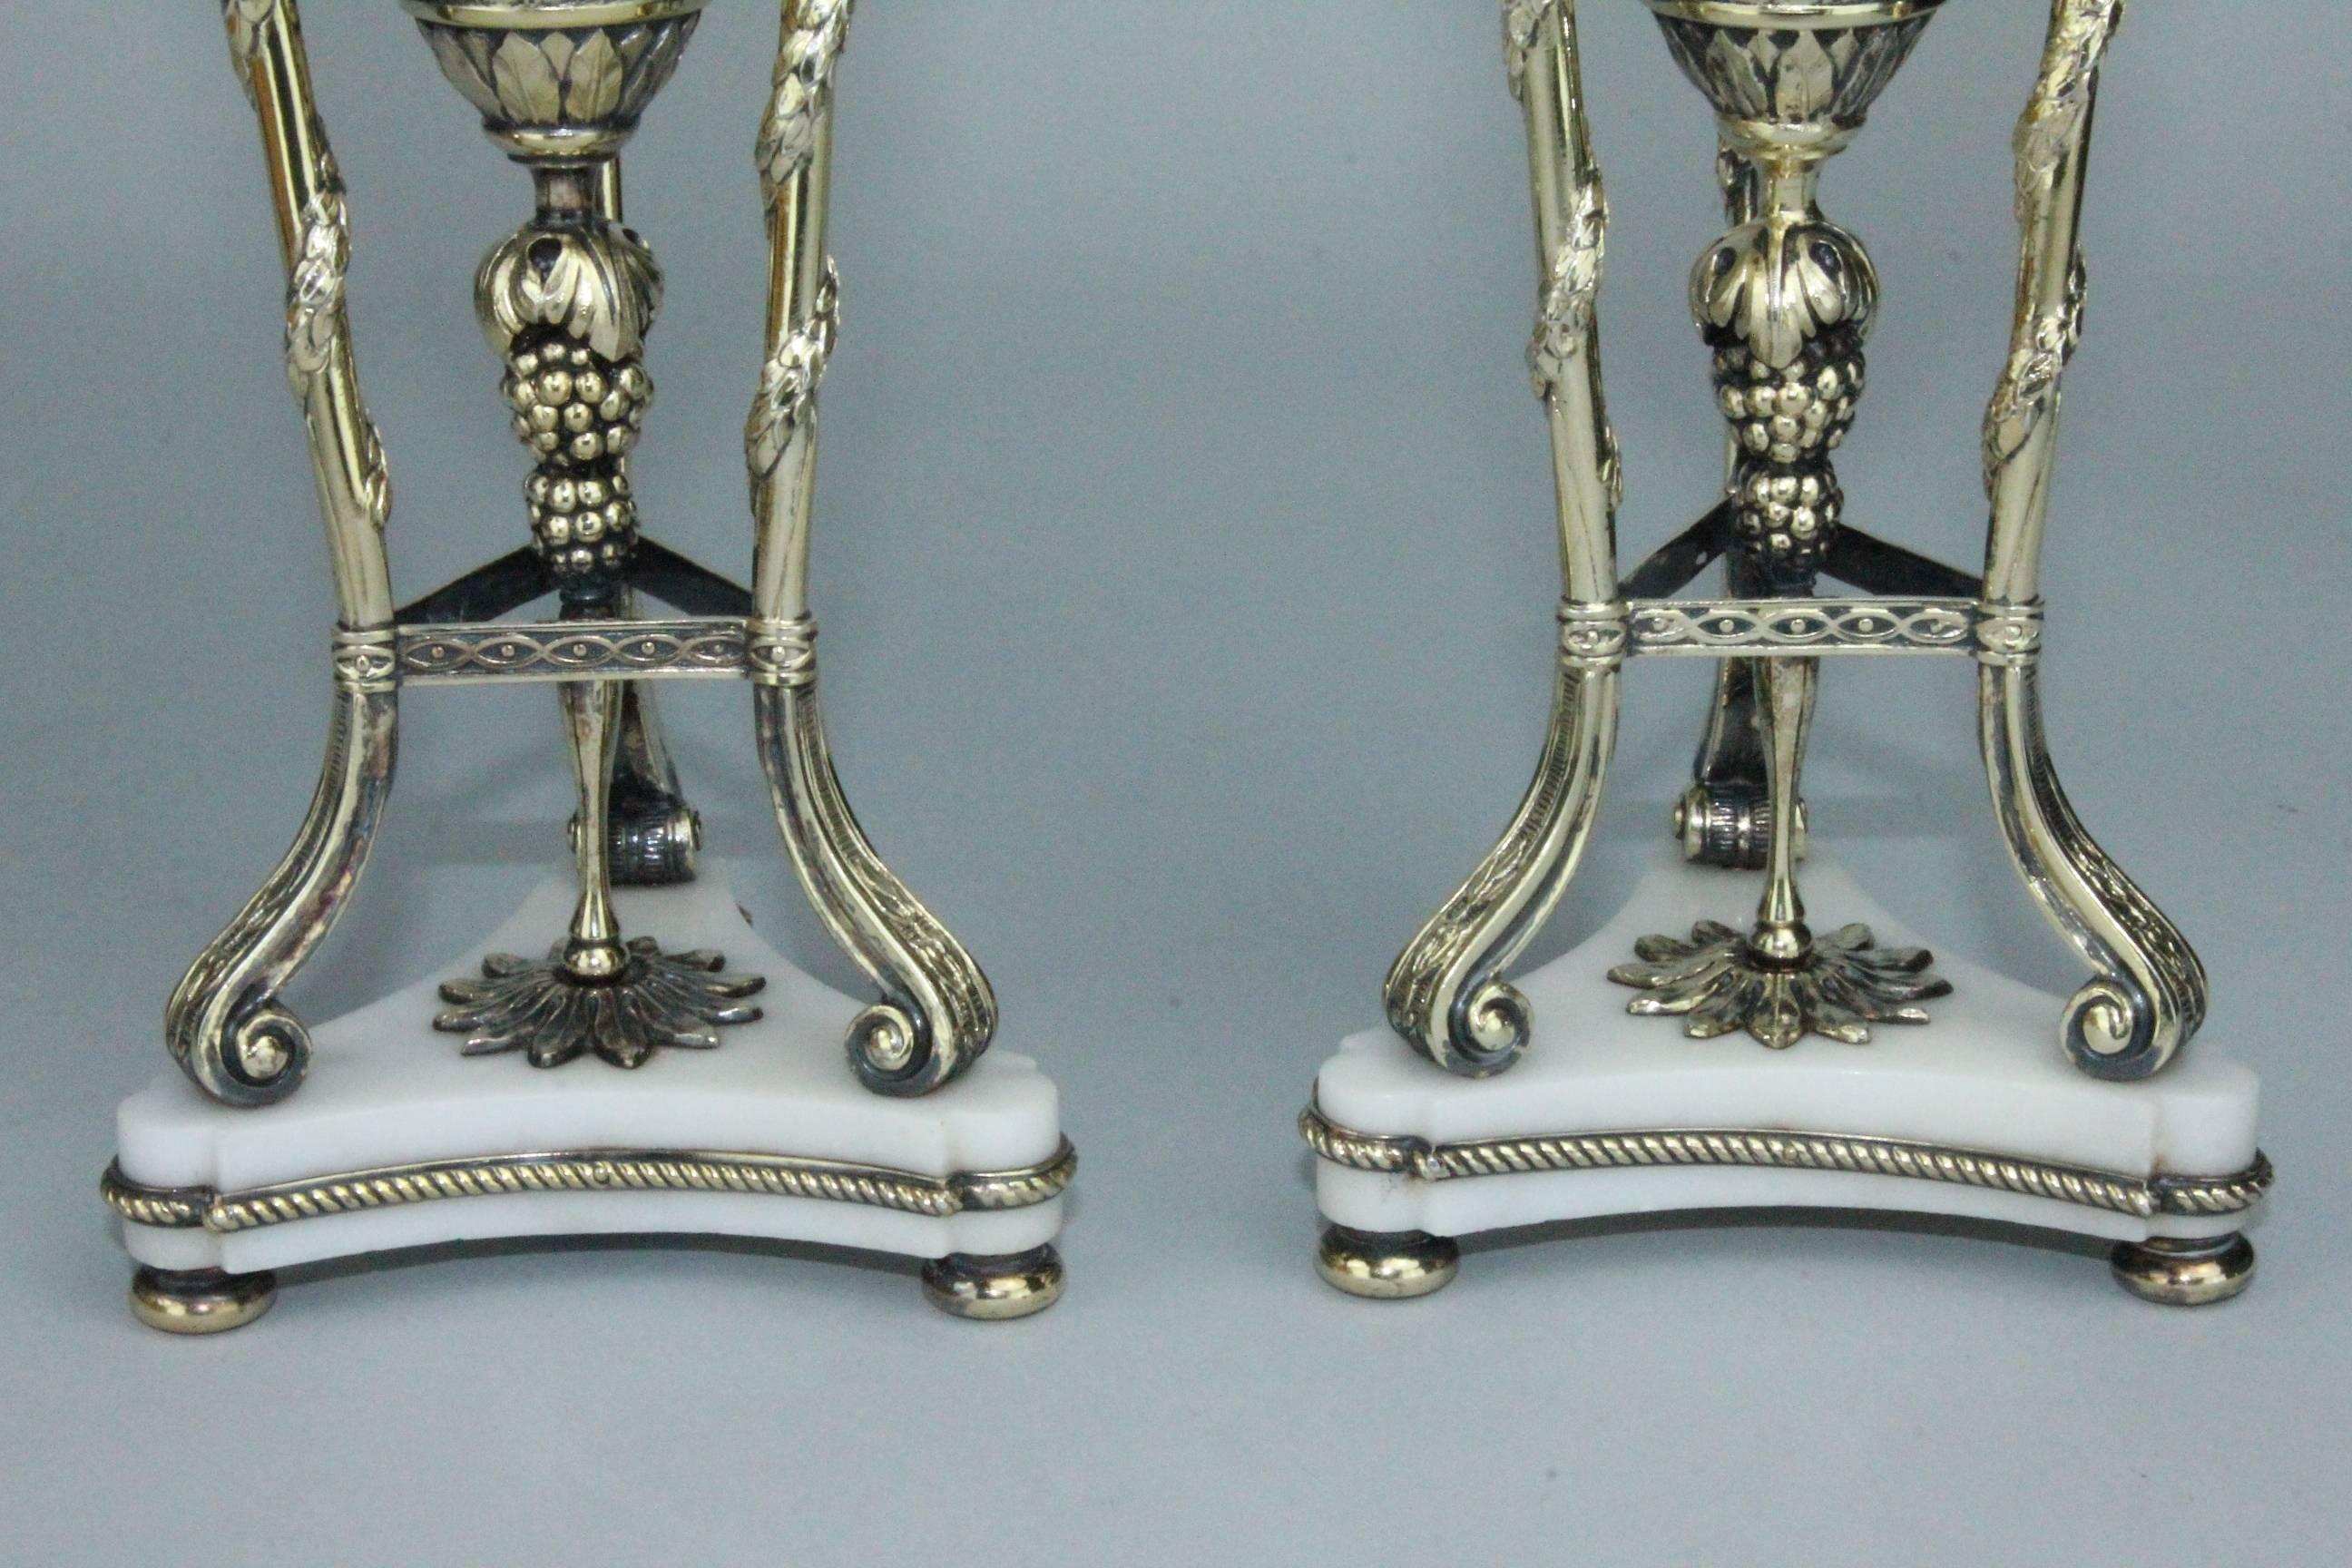 These pair of vases is stunning. The quality, the design, the gilt silver, the Carrara marble and the condition makes them suburb. They were made by the famous silver company C G Hallberg in Stockholm 1912. With flowers or just by themselves they